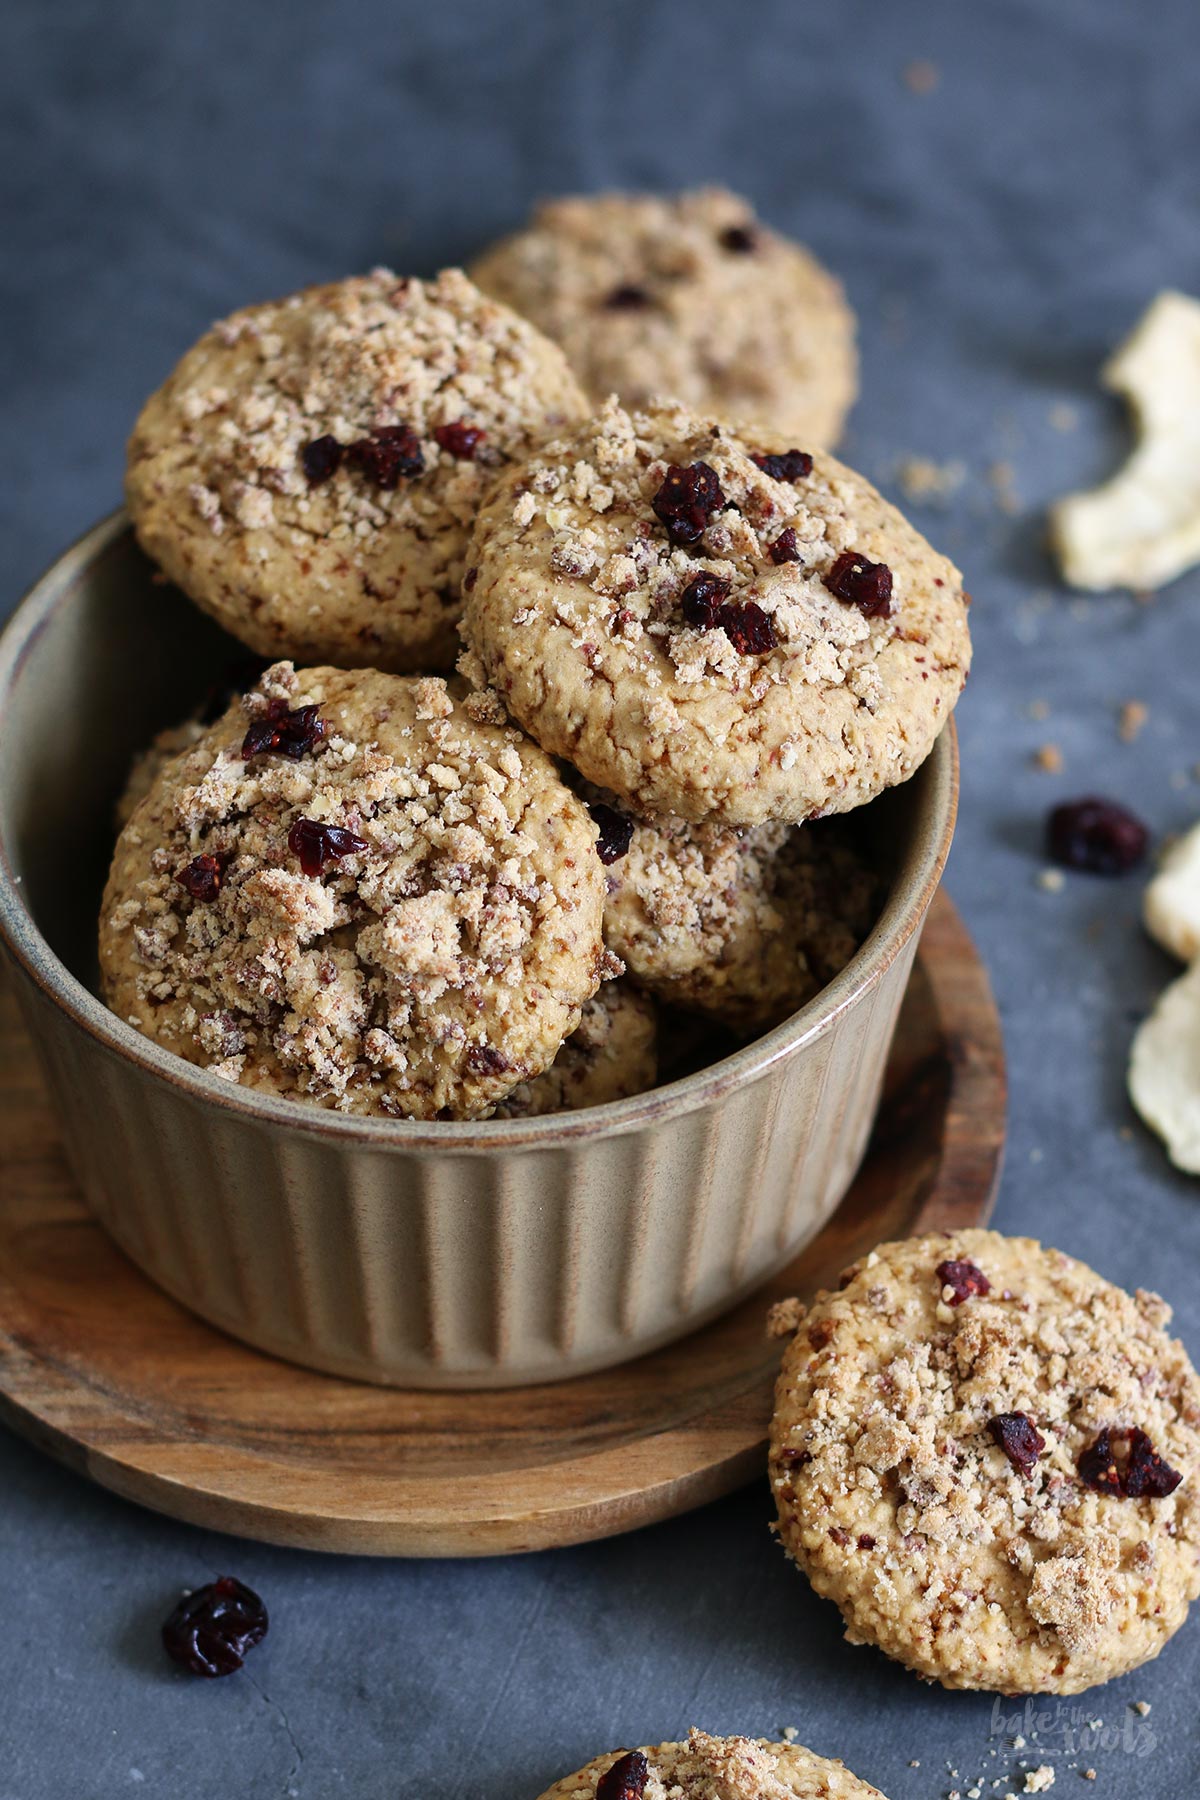 Apple & Cranberry Crumble Cookies | Bake to the roots